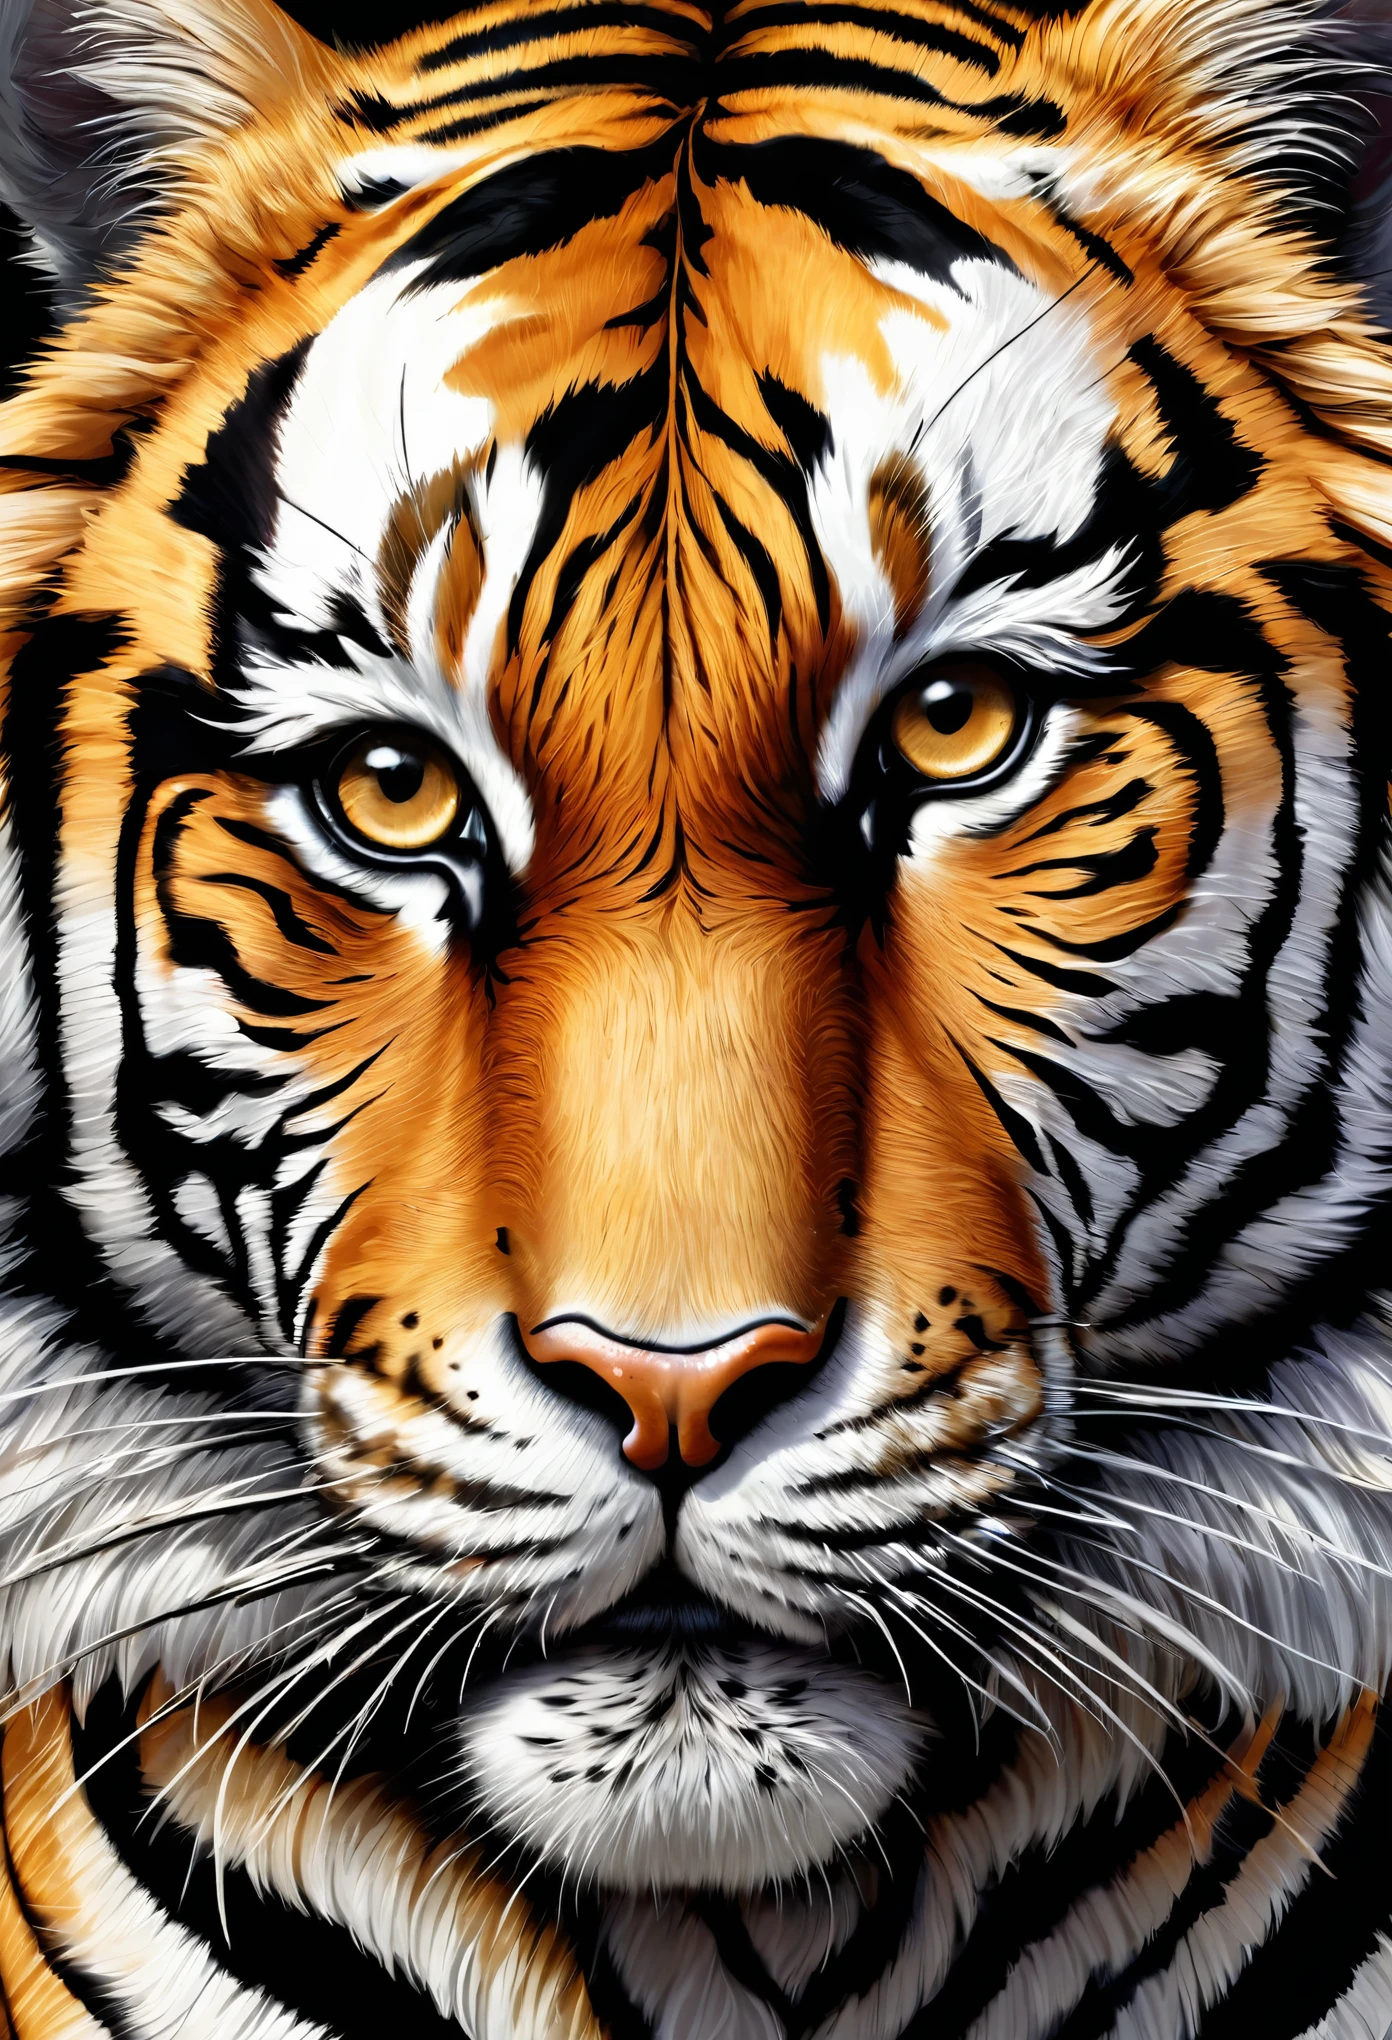 tiger,extremly detailed face,close-up